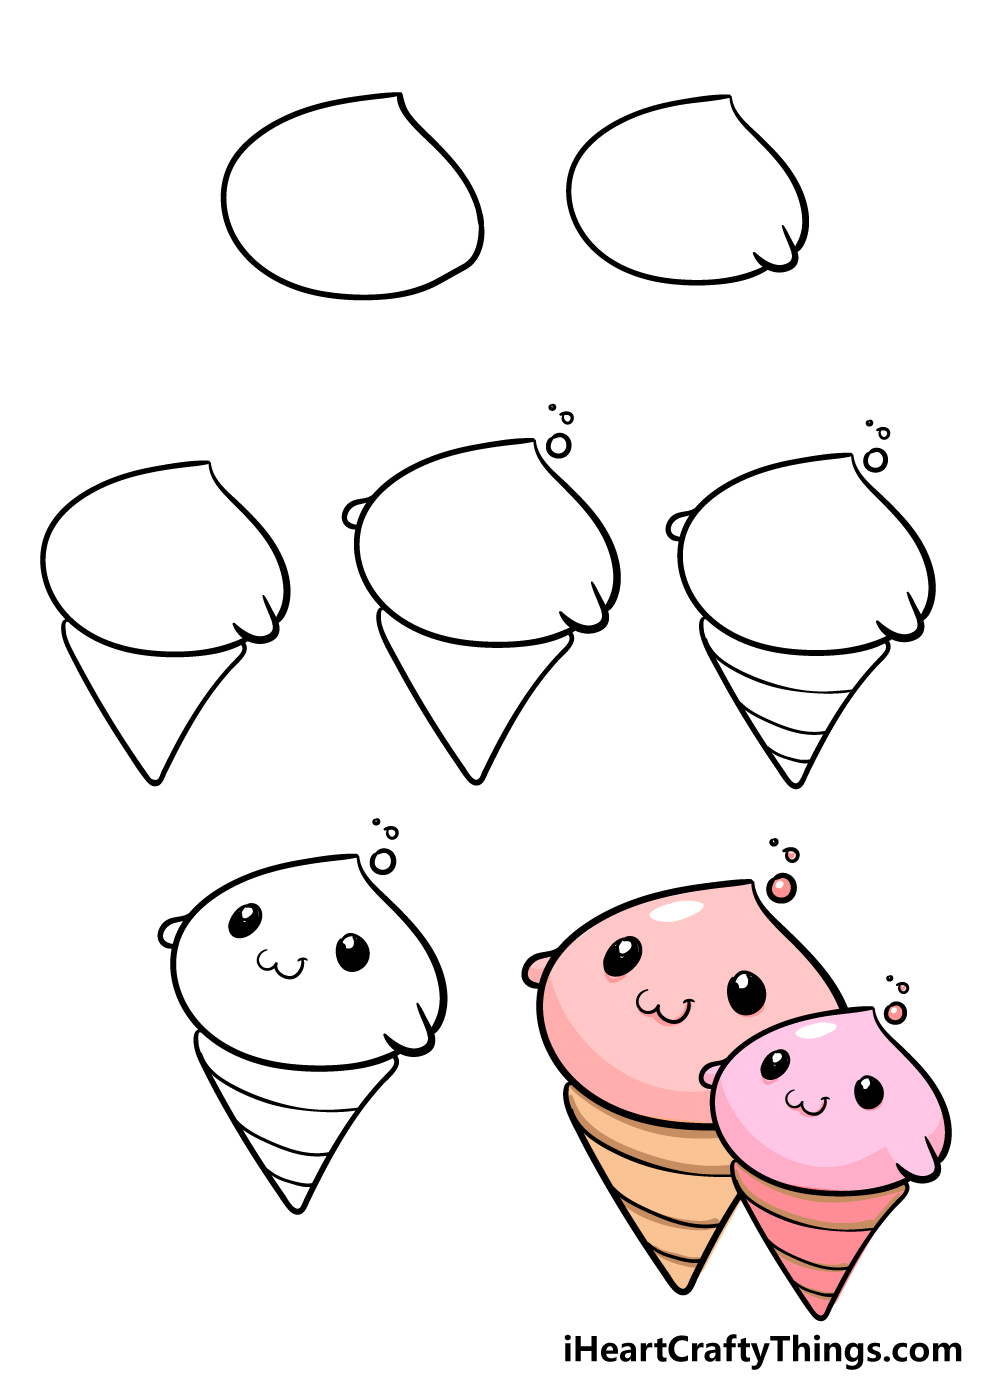 how to draw cute things in 7 steps